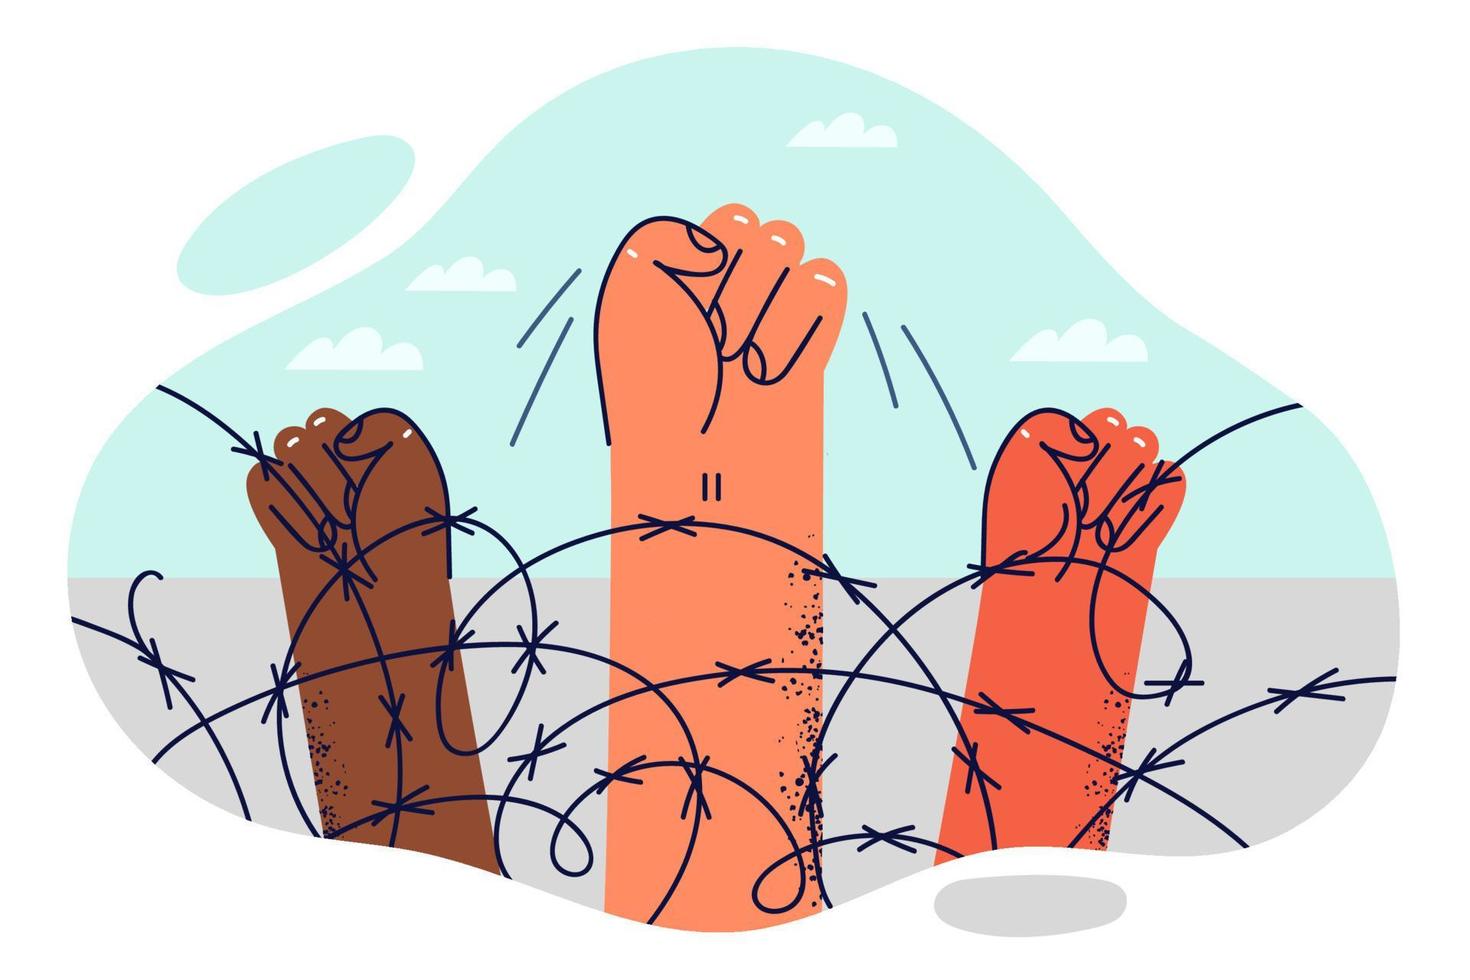 Hands of protesters are clenched into fist near barbed wire at border intended to restrict movement of illegal migrants. Fist is symbol of protest action of prisoners against deprivation of liberty vector